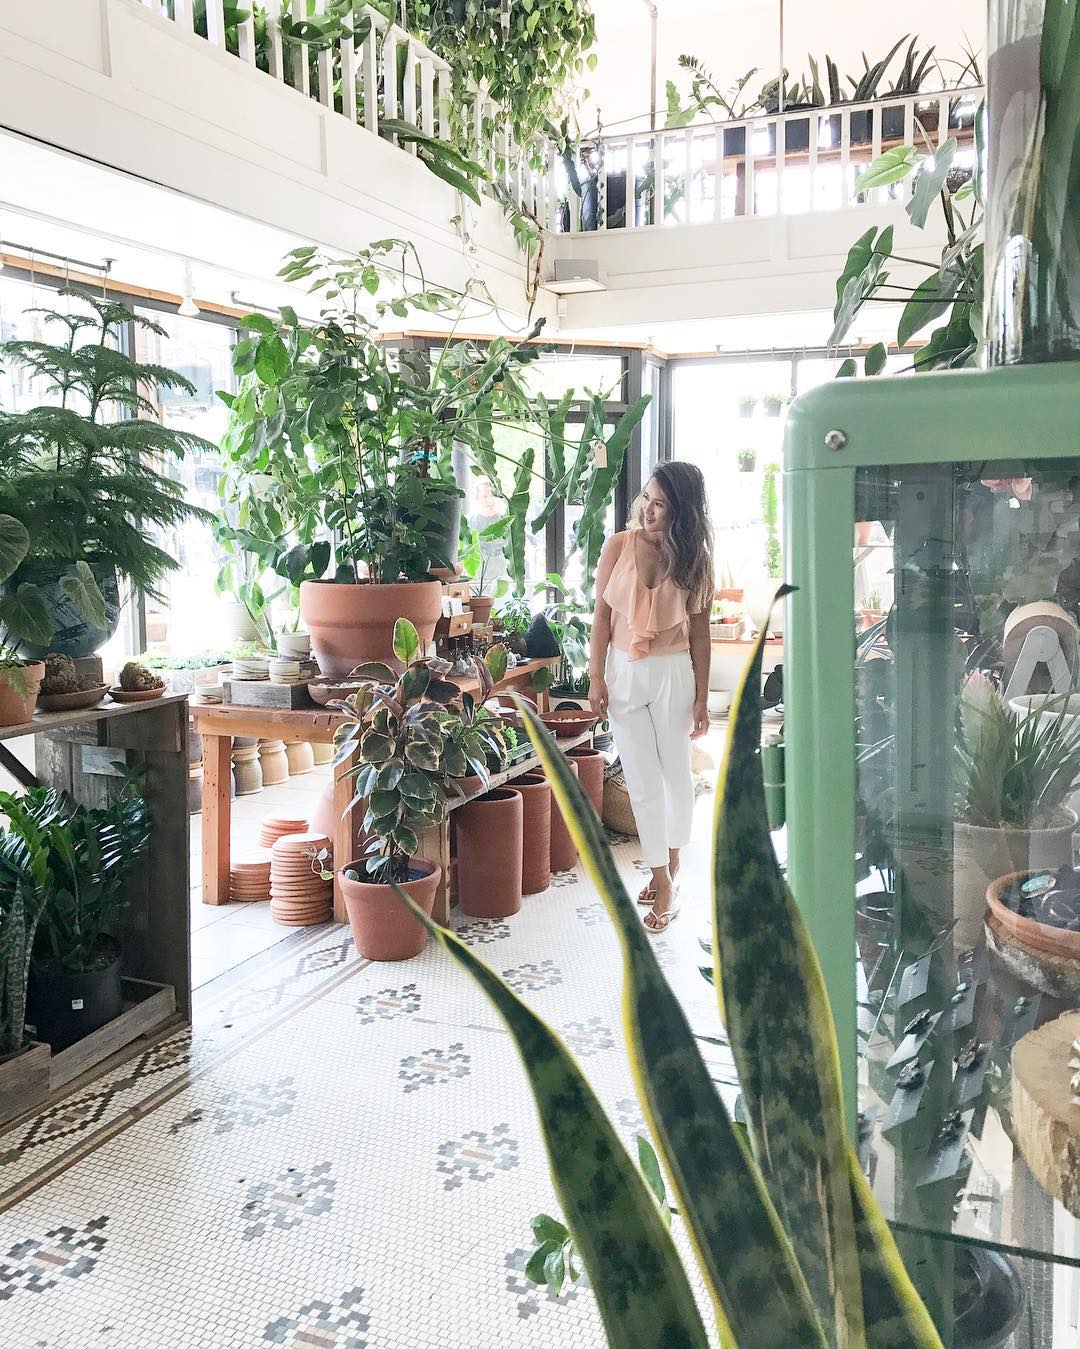 Where to buy house plants in Vancouver